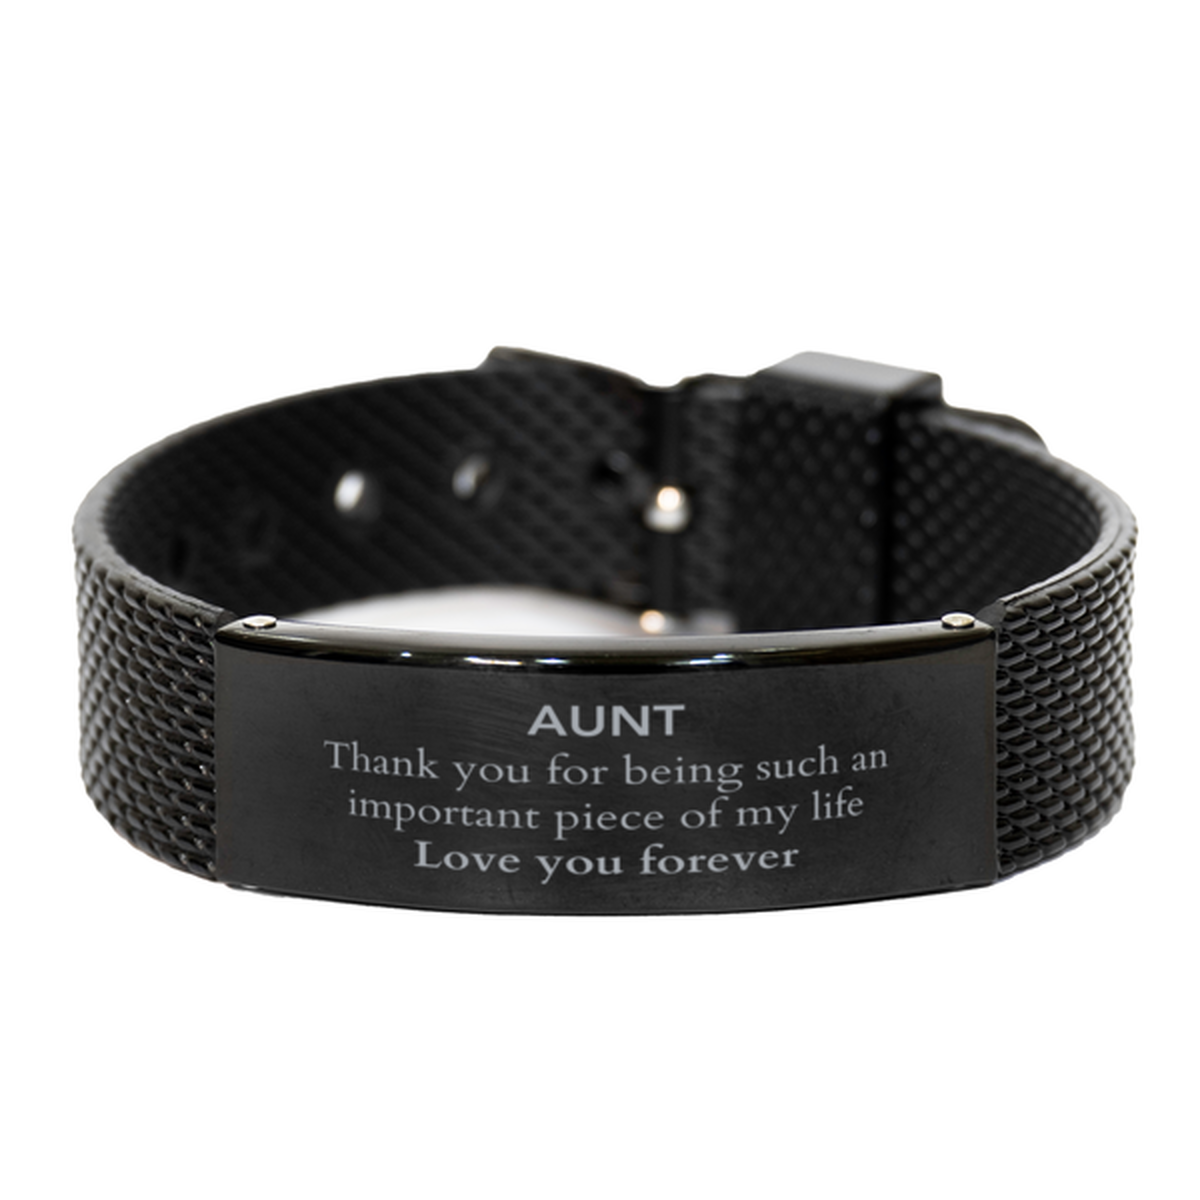 Appropriate Aunt Black Shark Mesh Bracelet Epic Birthday Gifts for Aunt Thank you for being such an important piece of my life Aunt Christmas Mothers Fathers Day